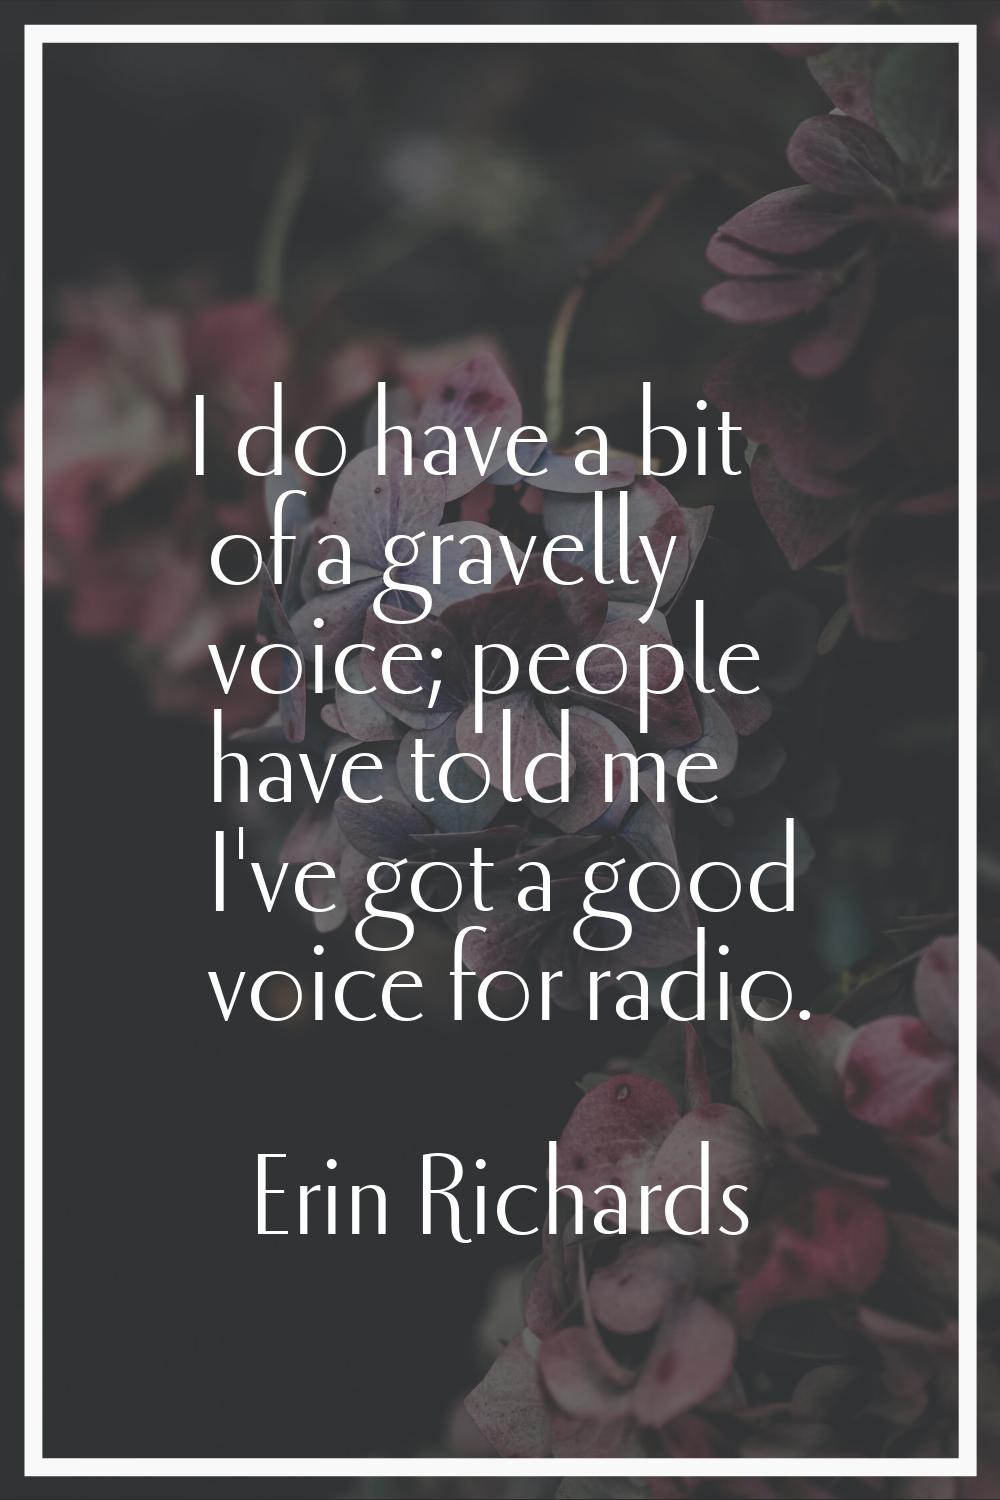 I do have a bit of a gravelly voice; people have told me I've got a good voice for radio.